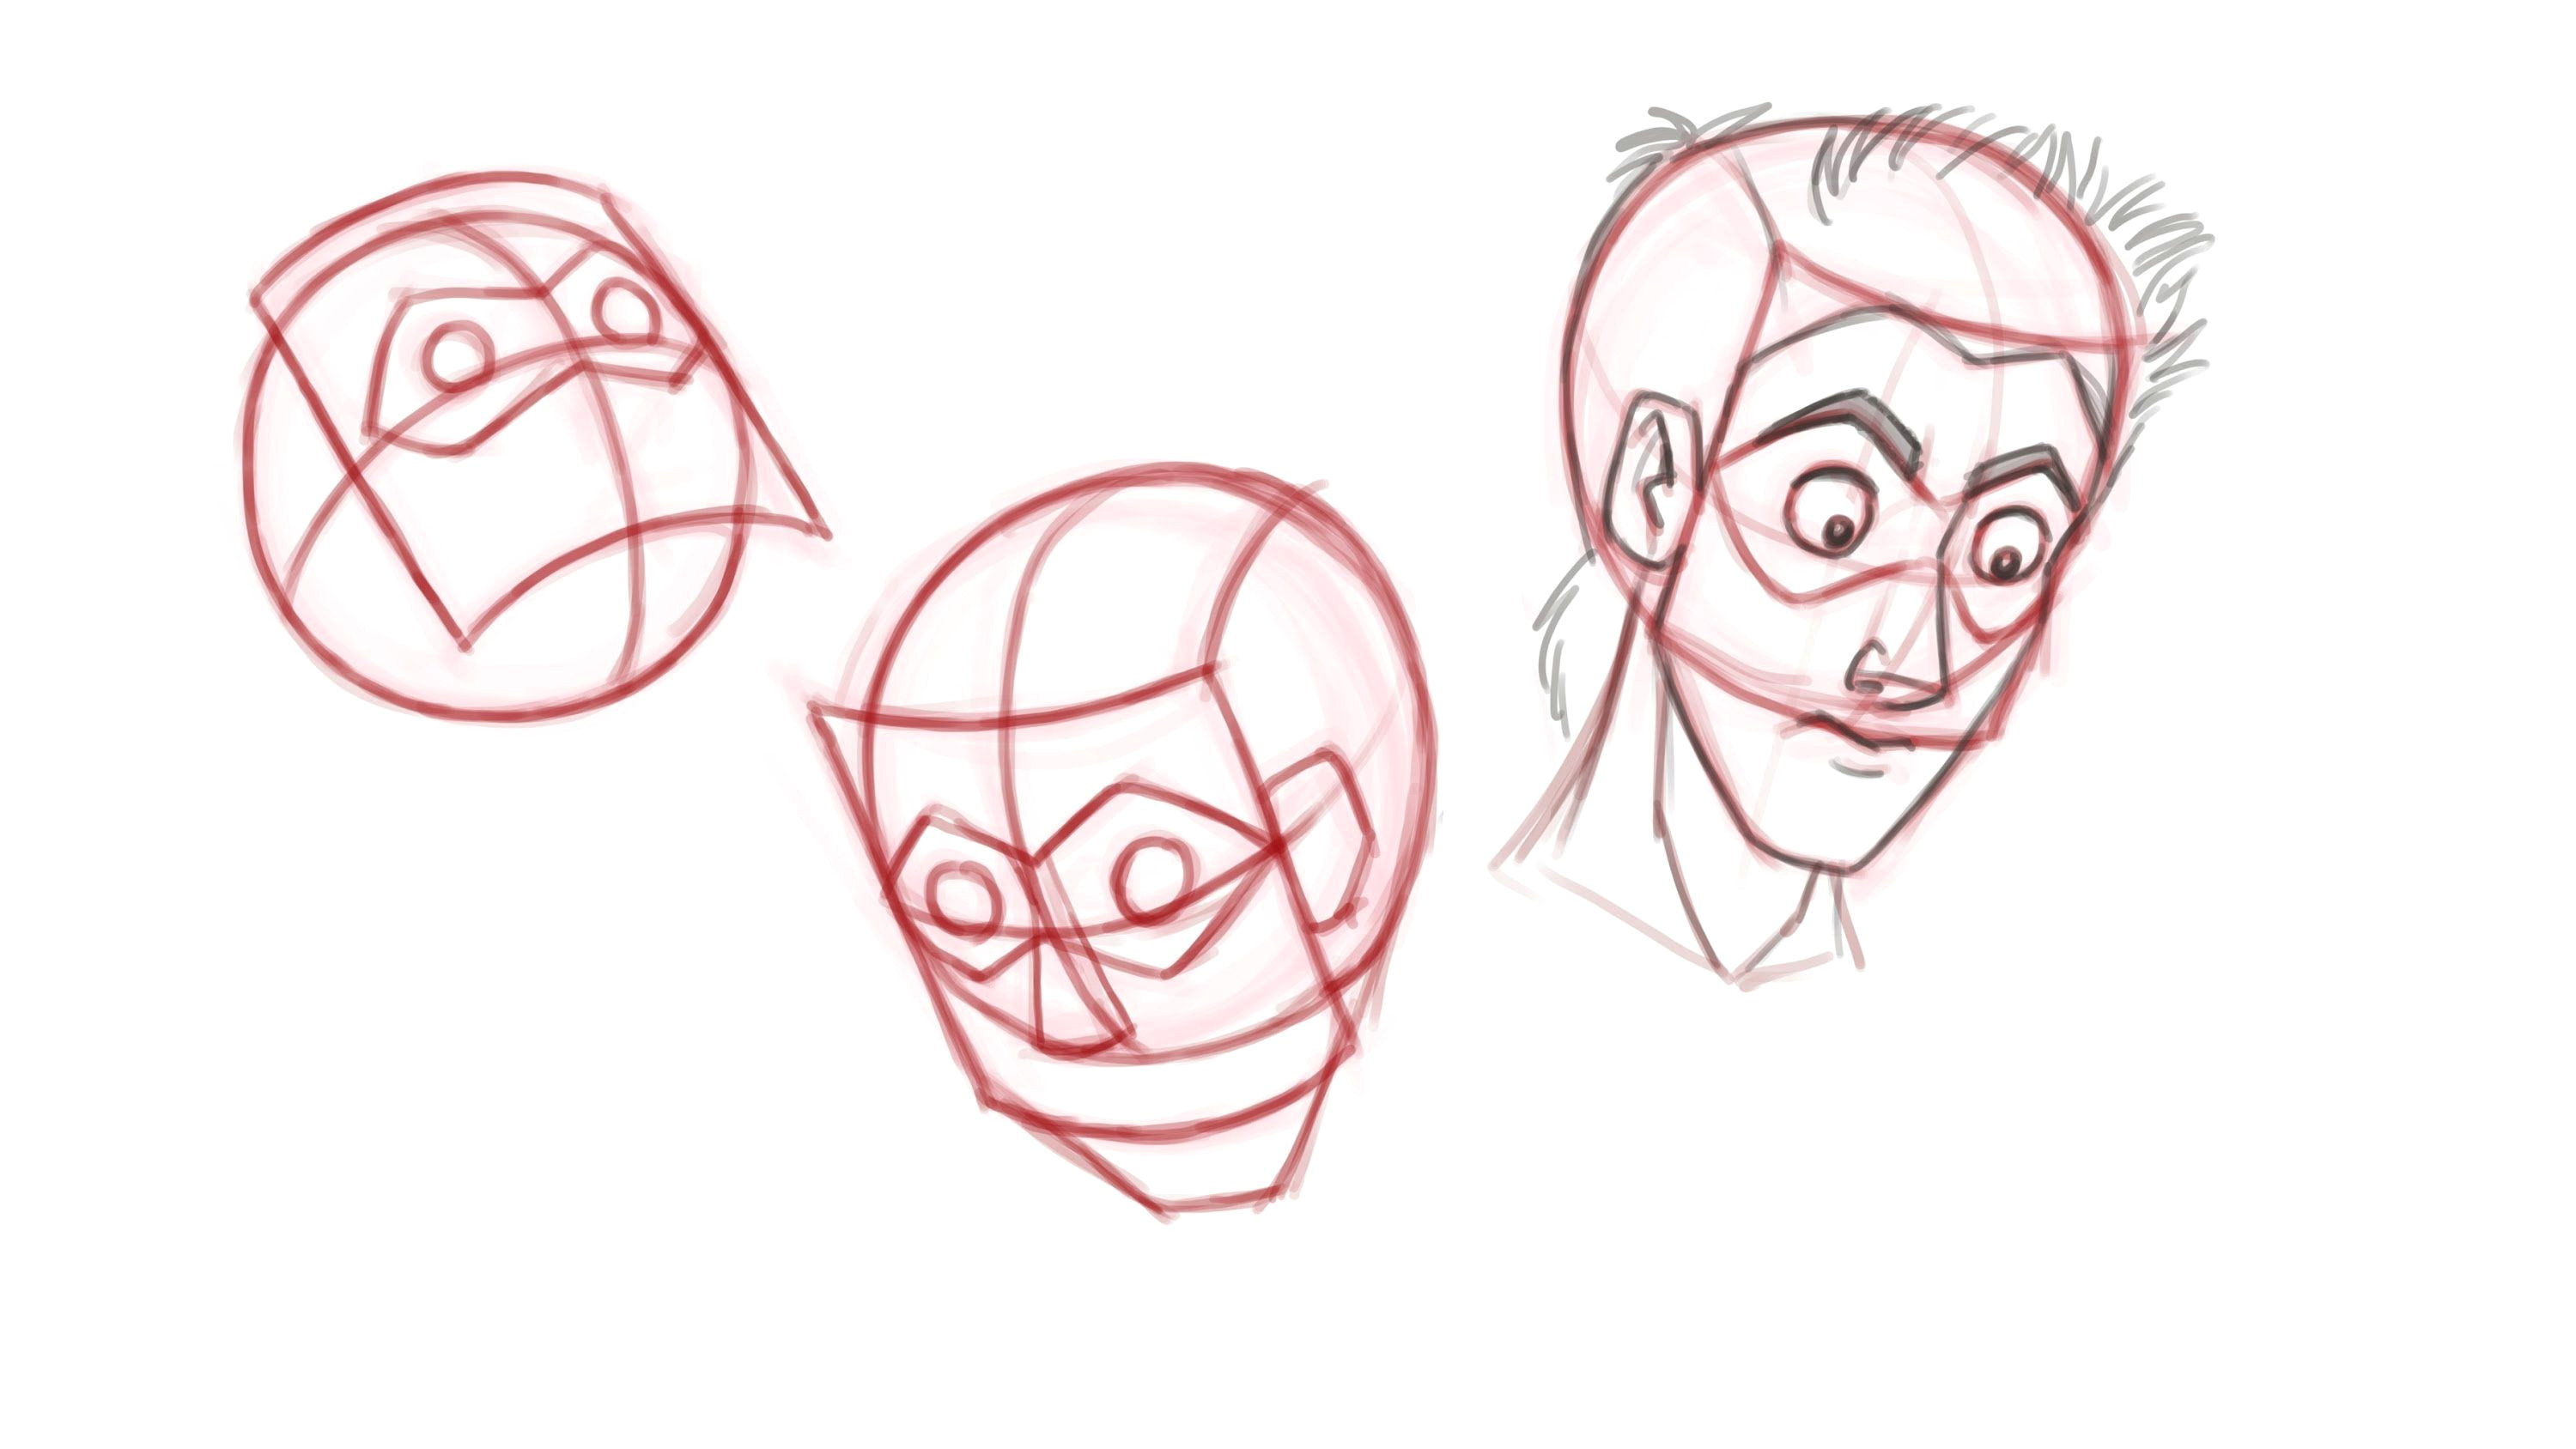 Drawing A Moving Cartoon Drawn Animation Tutorial How to Animate Heads Drawing Faces From